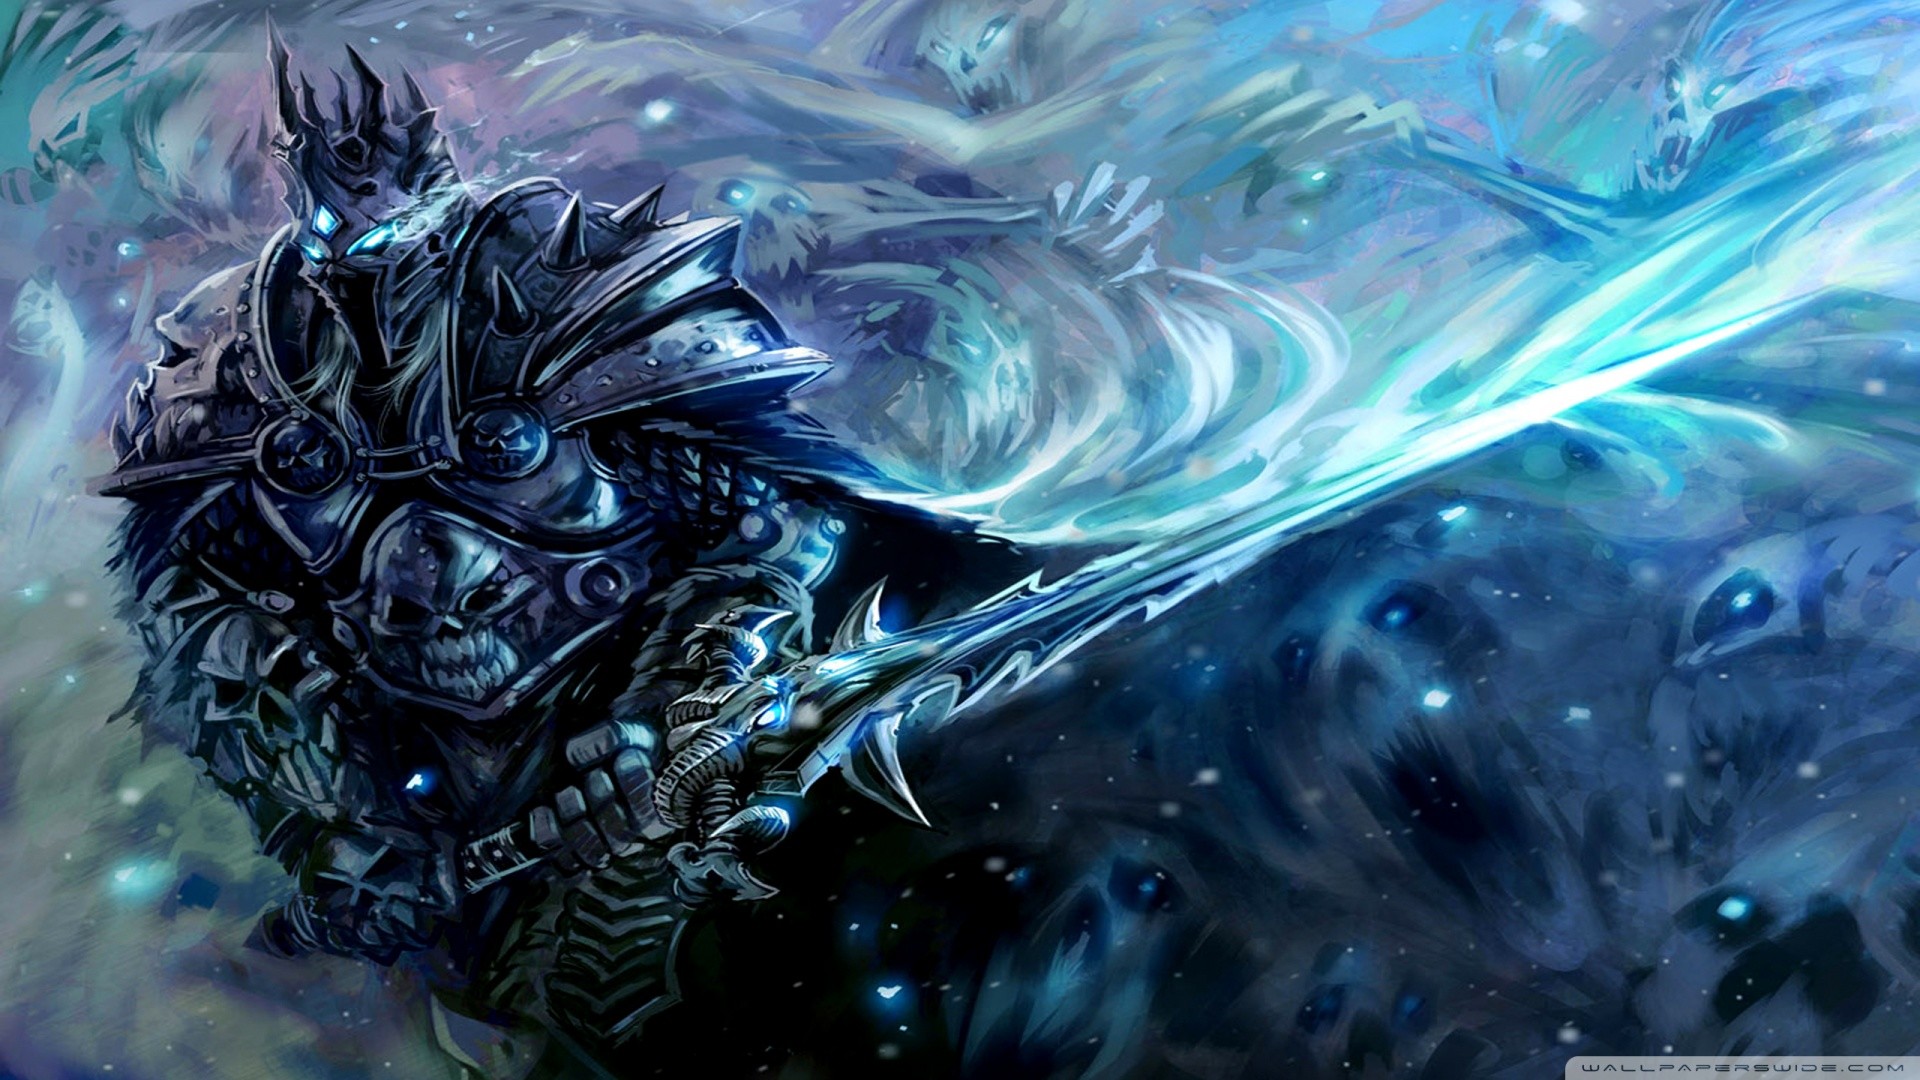 1920x1080 World Of Warcraft The Lich King Wallpapers x | HD Wallpapers | Pinterest |  Lich king and Wallpaper